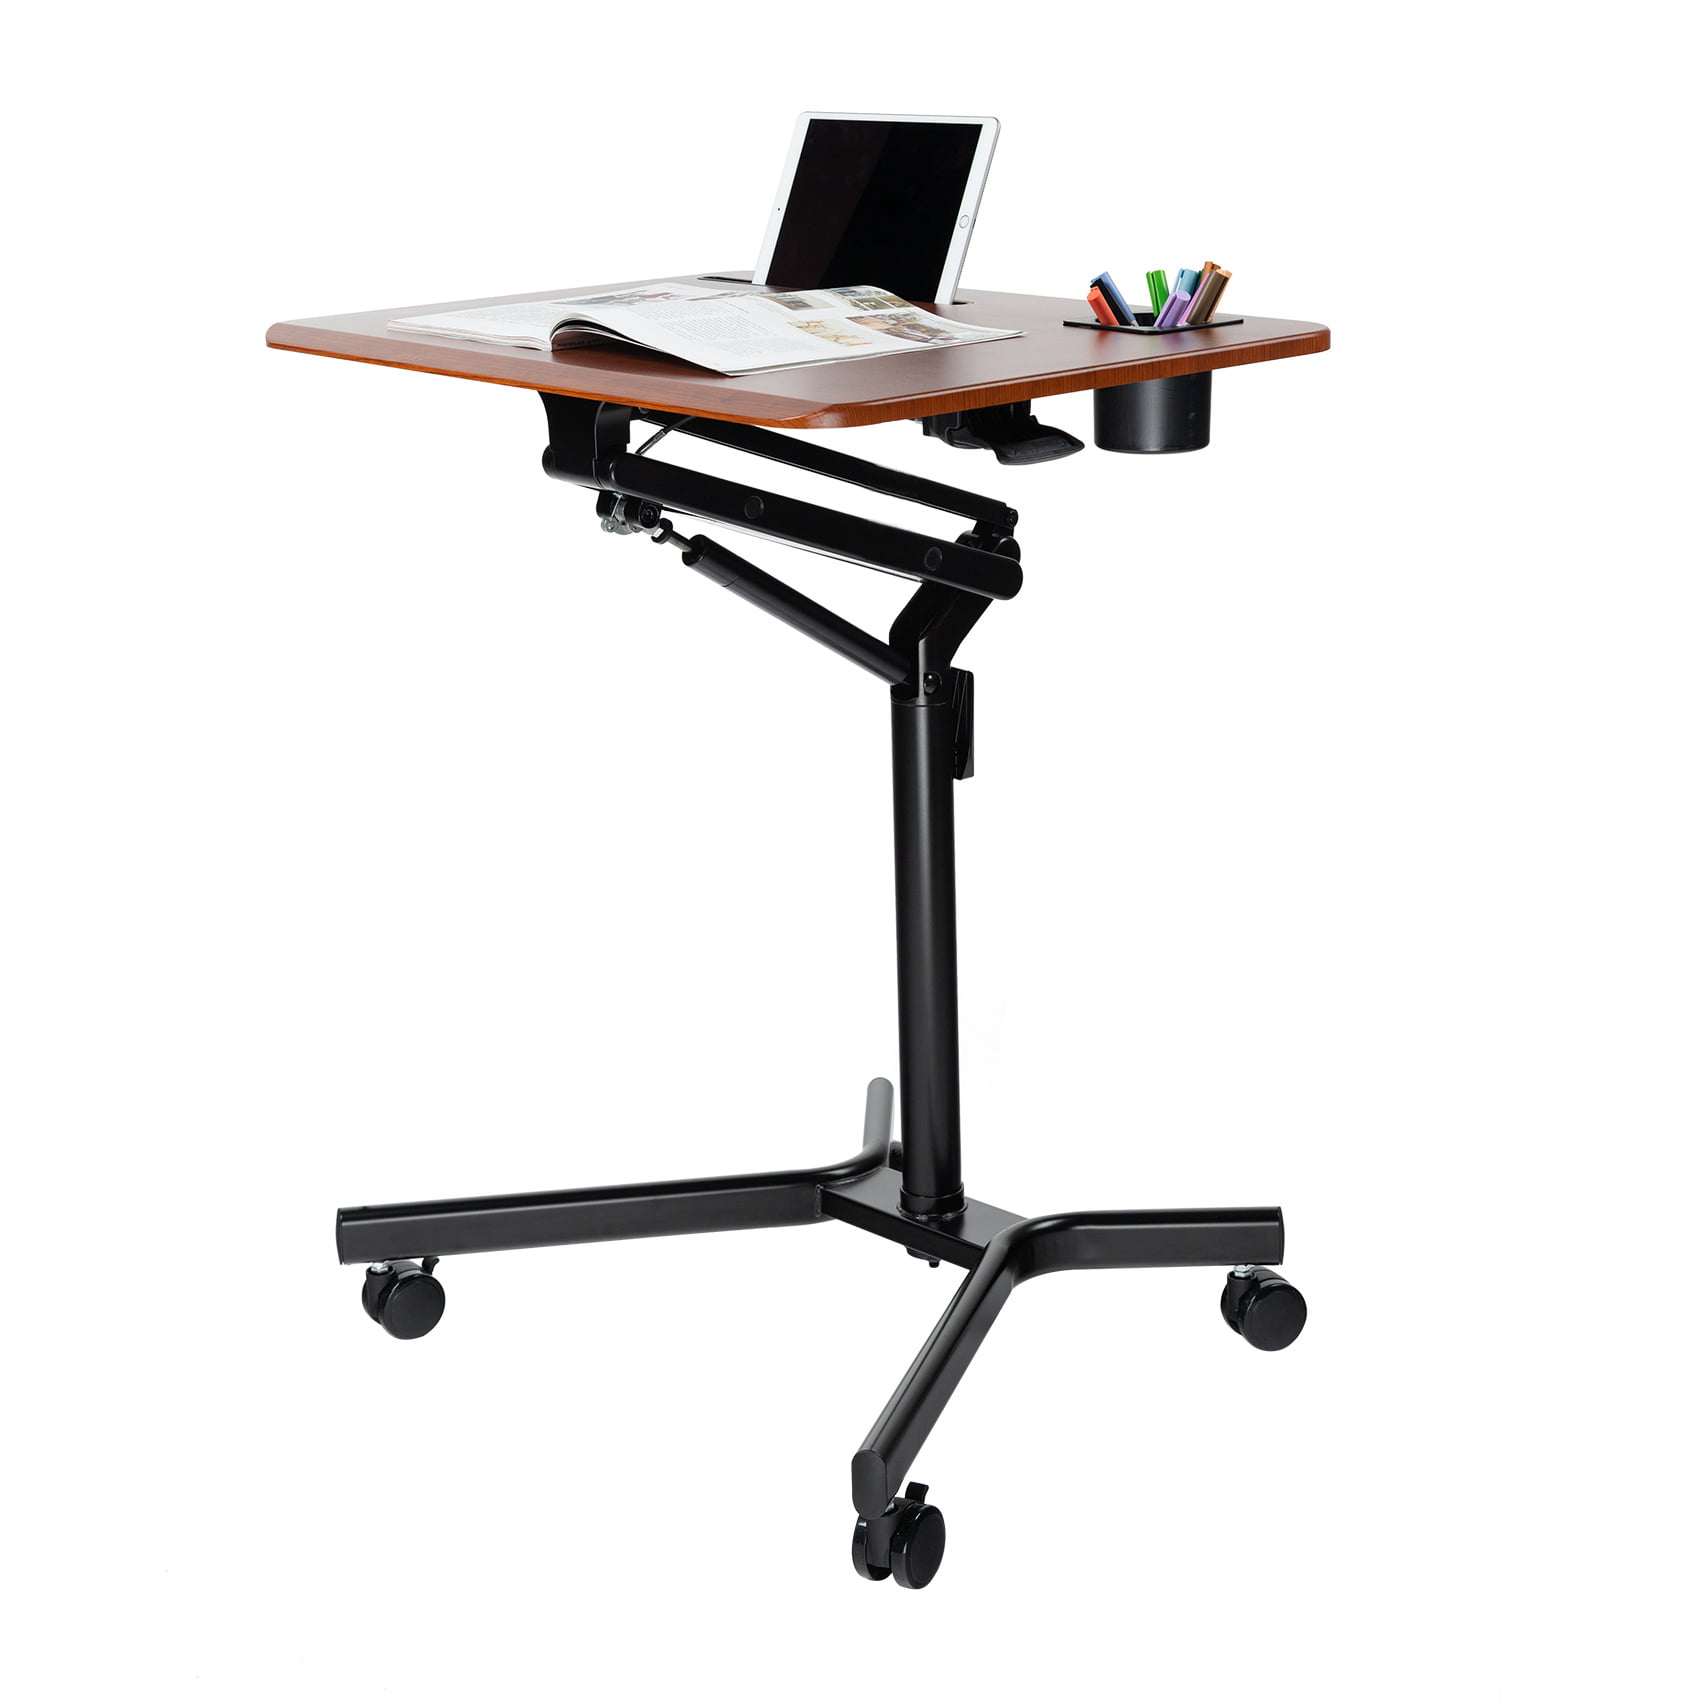 Adjustable Height Desk Laptop Office Home Movable Portable Small Side Cart Table 